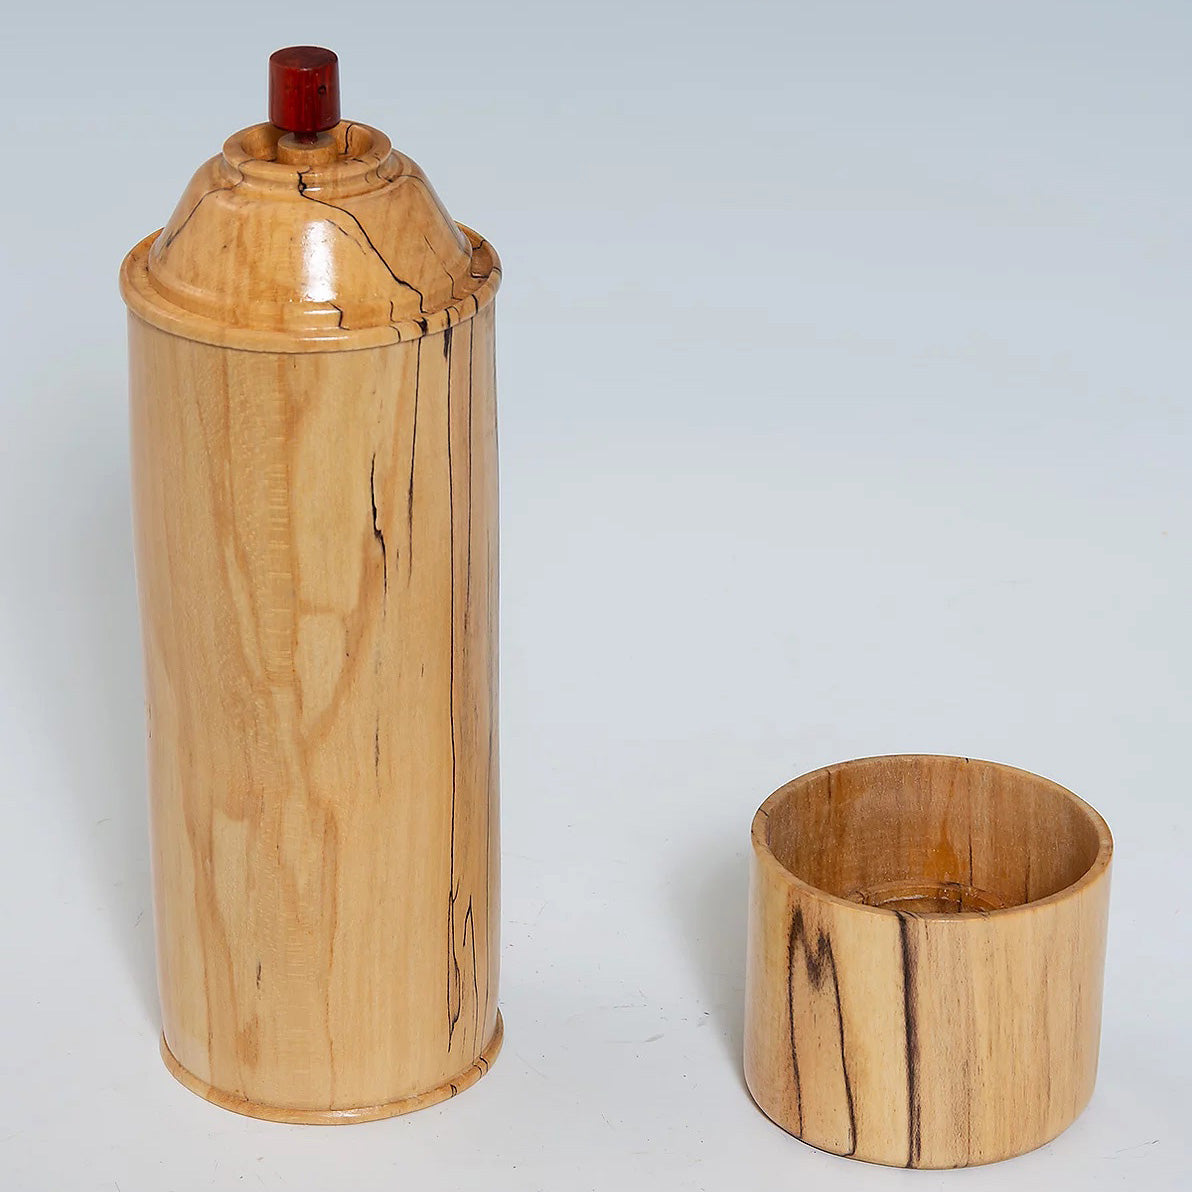 A wooden replica of a spray paint can with the lid off. The wood is light colored. 